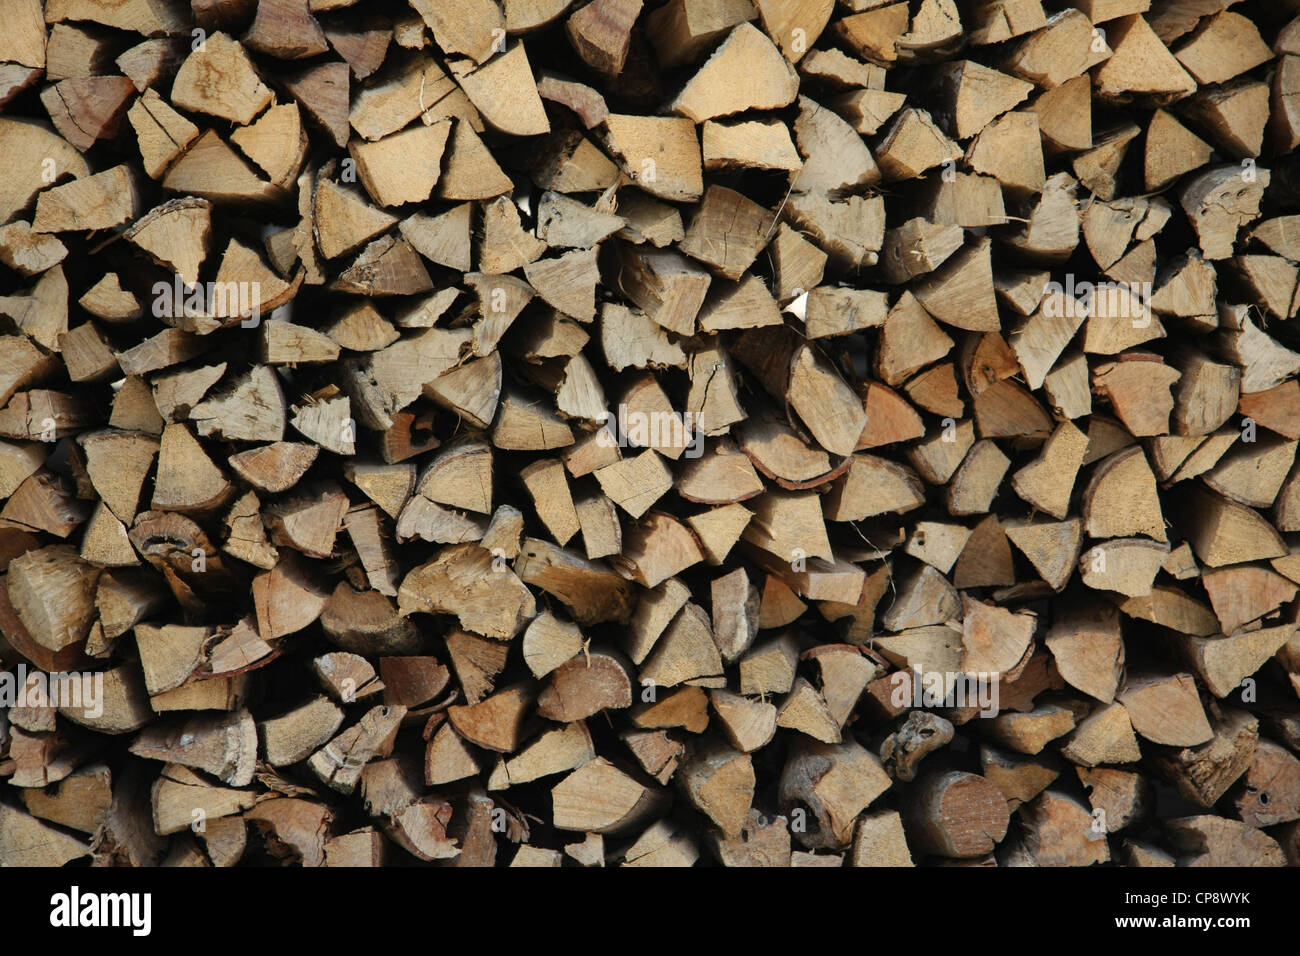 Firewood stacked in aesthetically pleasing pattern Stock Photo